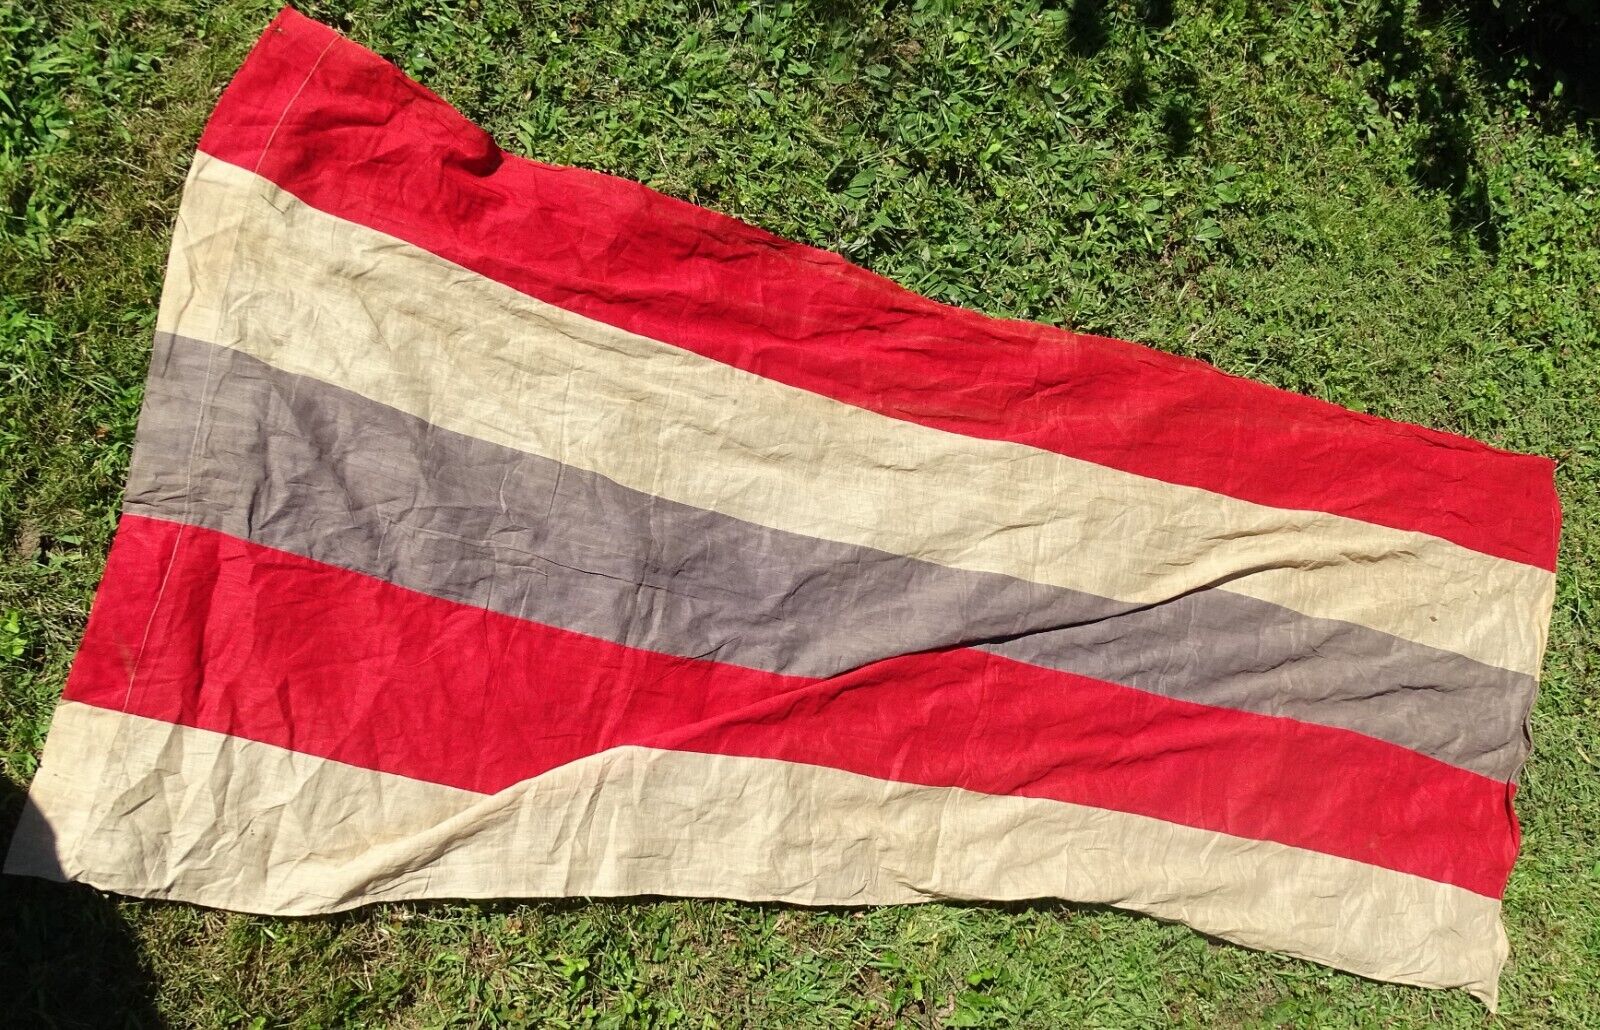 Old Striped Flag (found with nautical / ship flags) perhaps Thailand related?